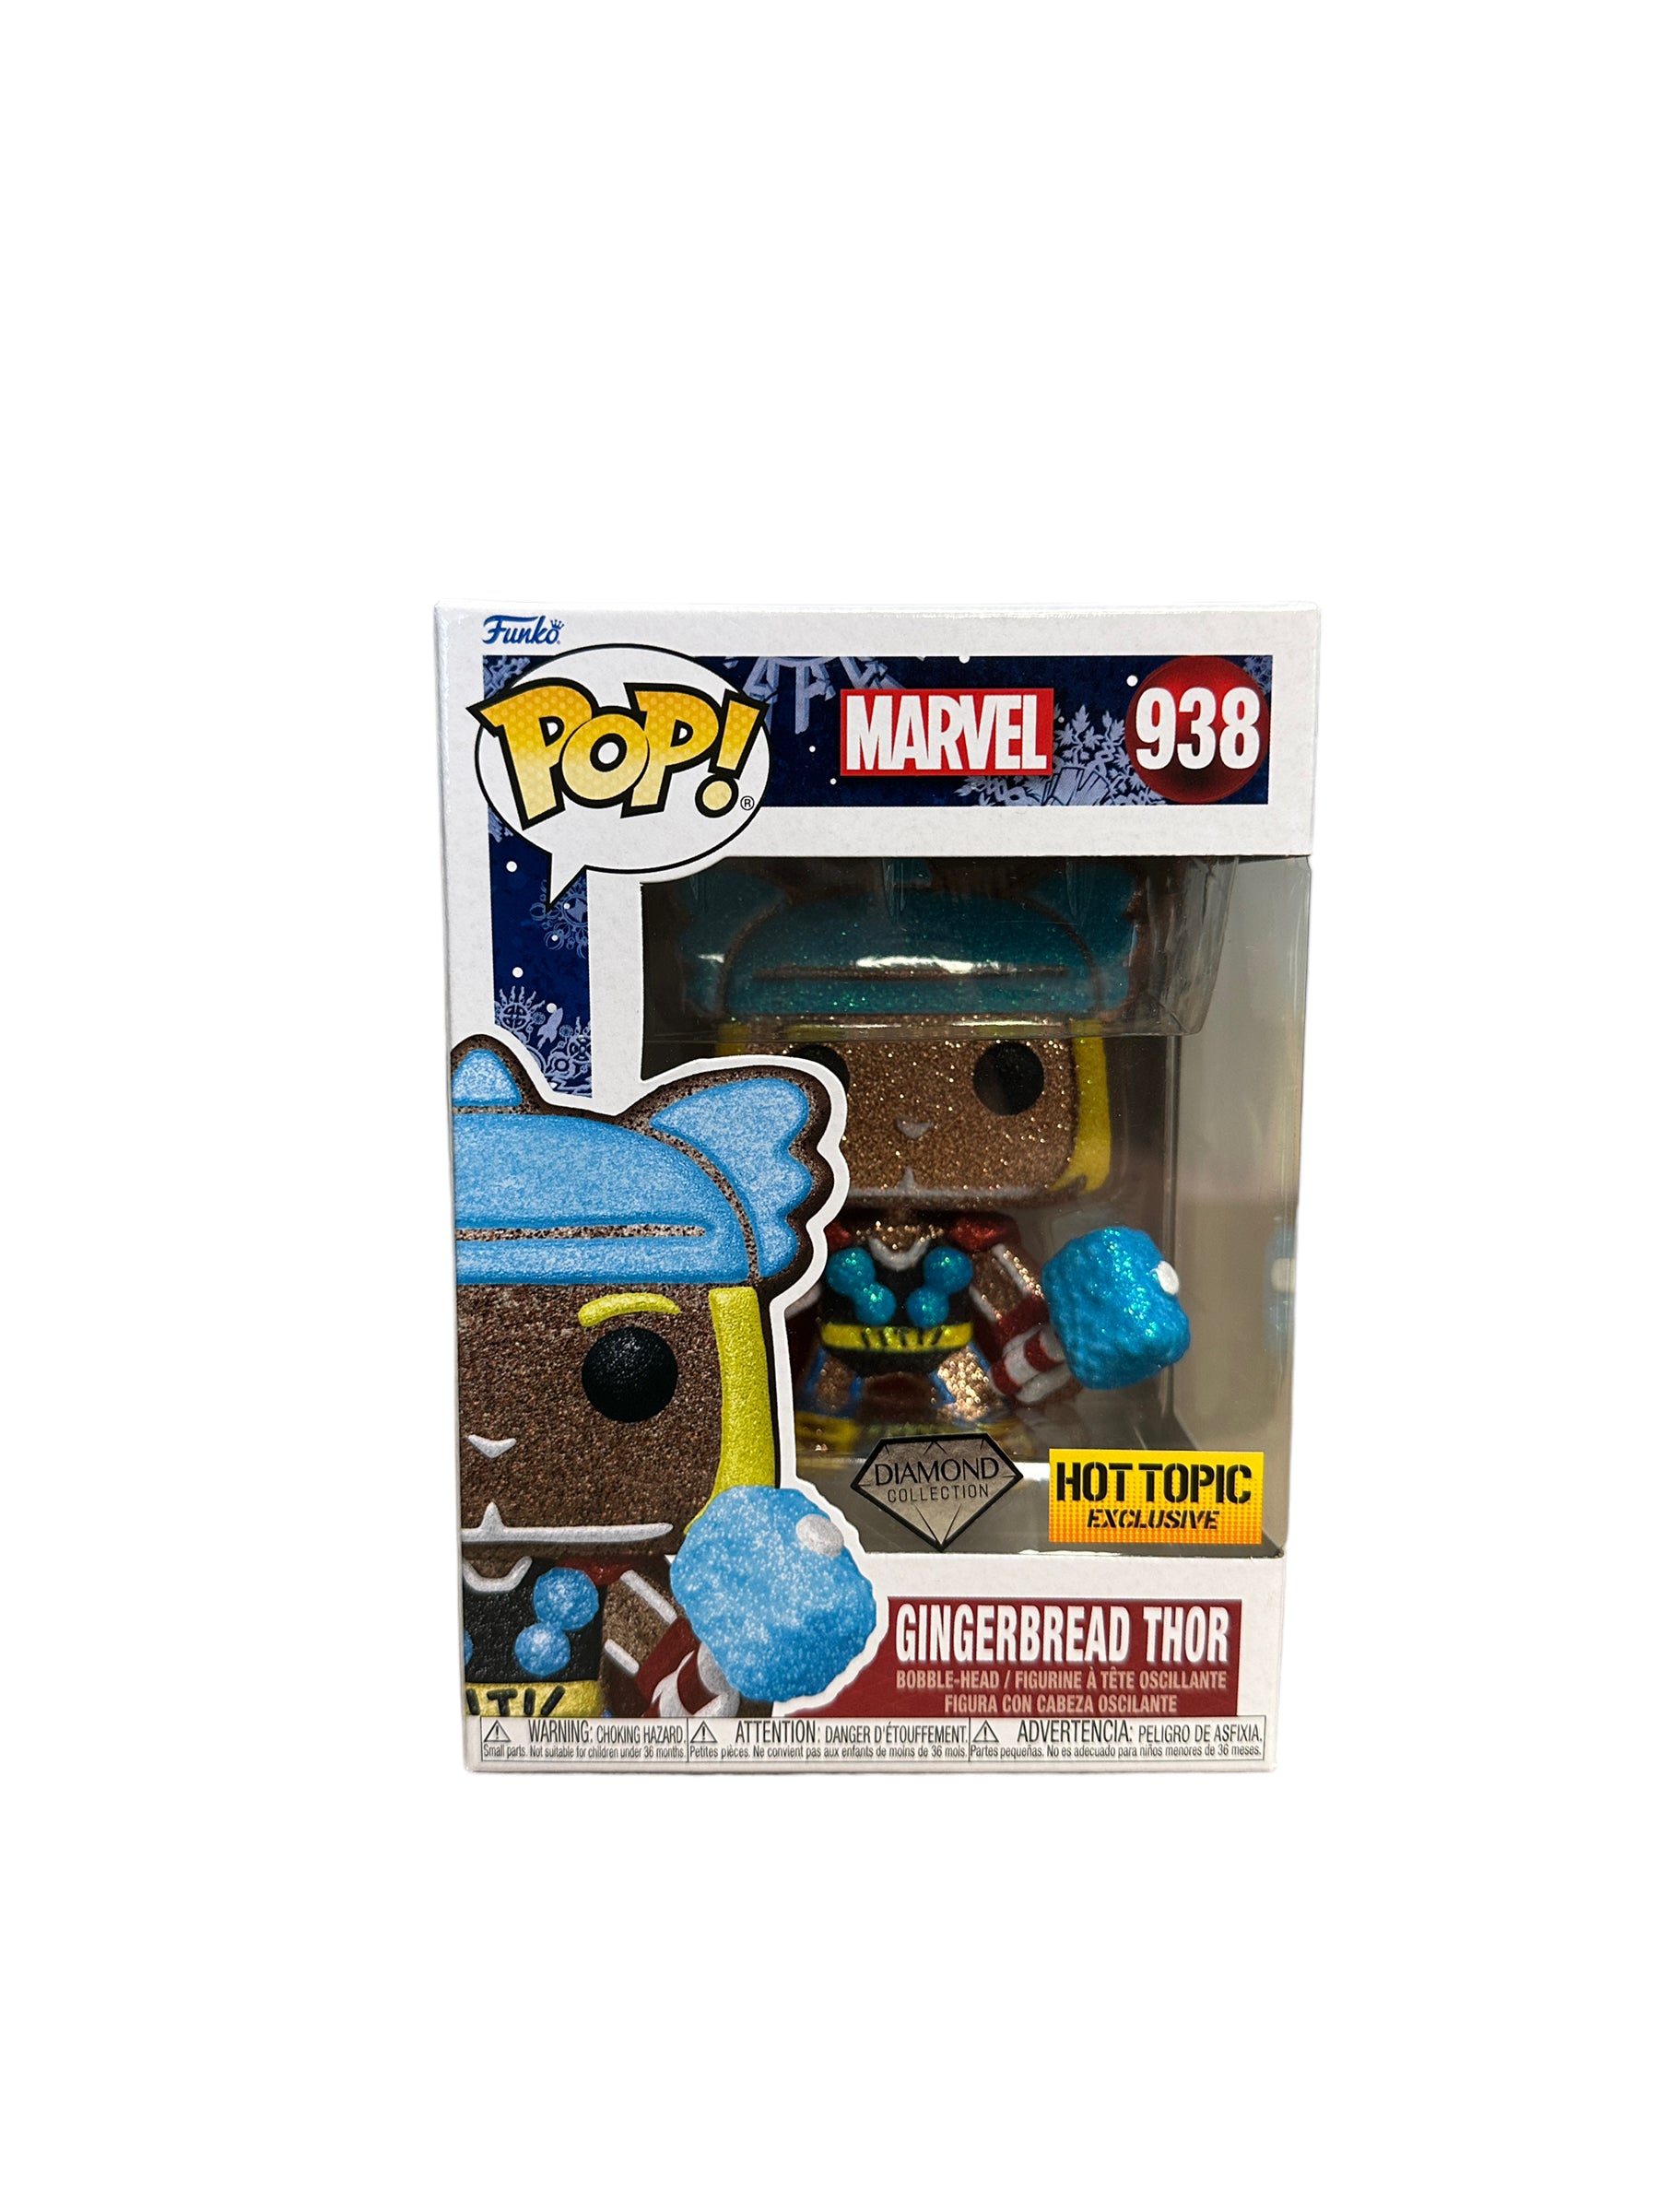 Gingerbread Thor #938 (Diamond Collection) Funko Pop! - Marvel - Hot Topic Exclusive - Condition 9.5/10